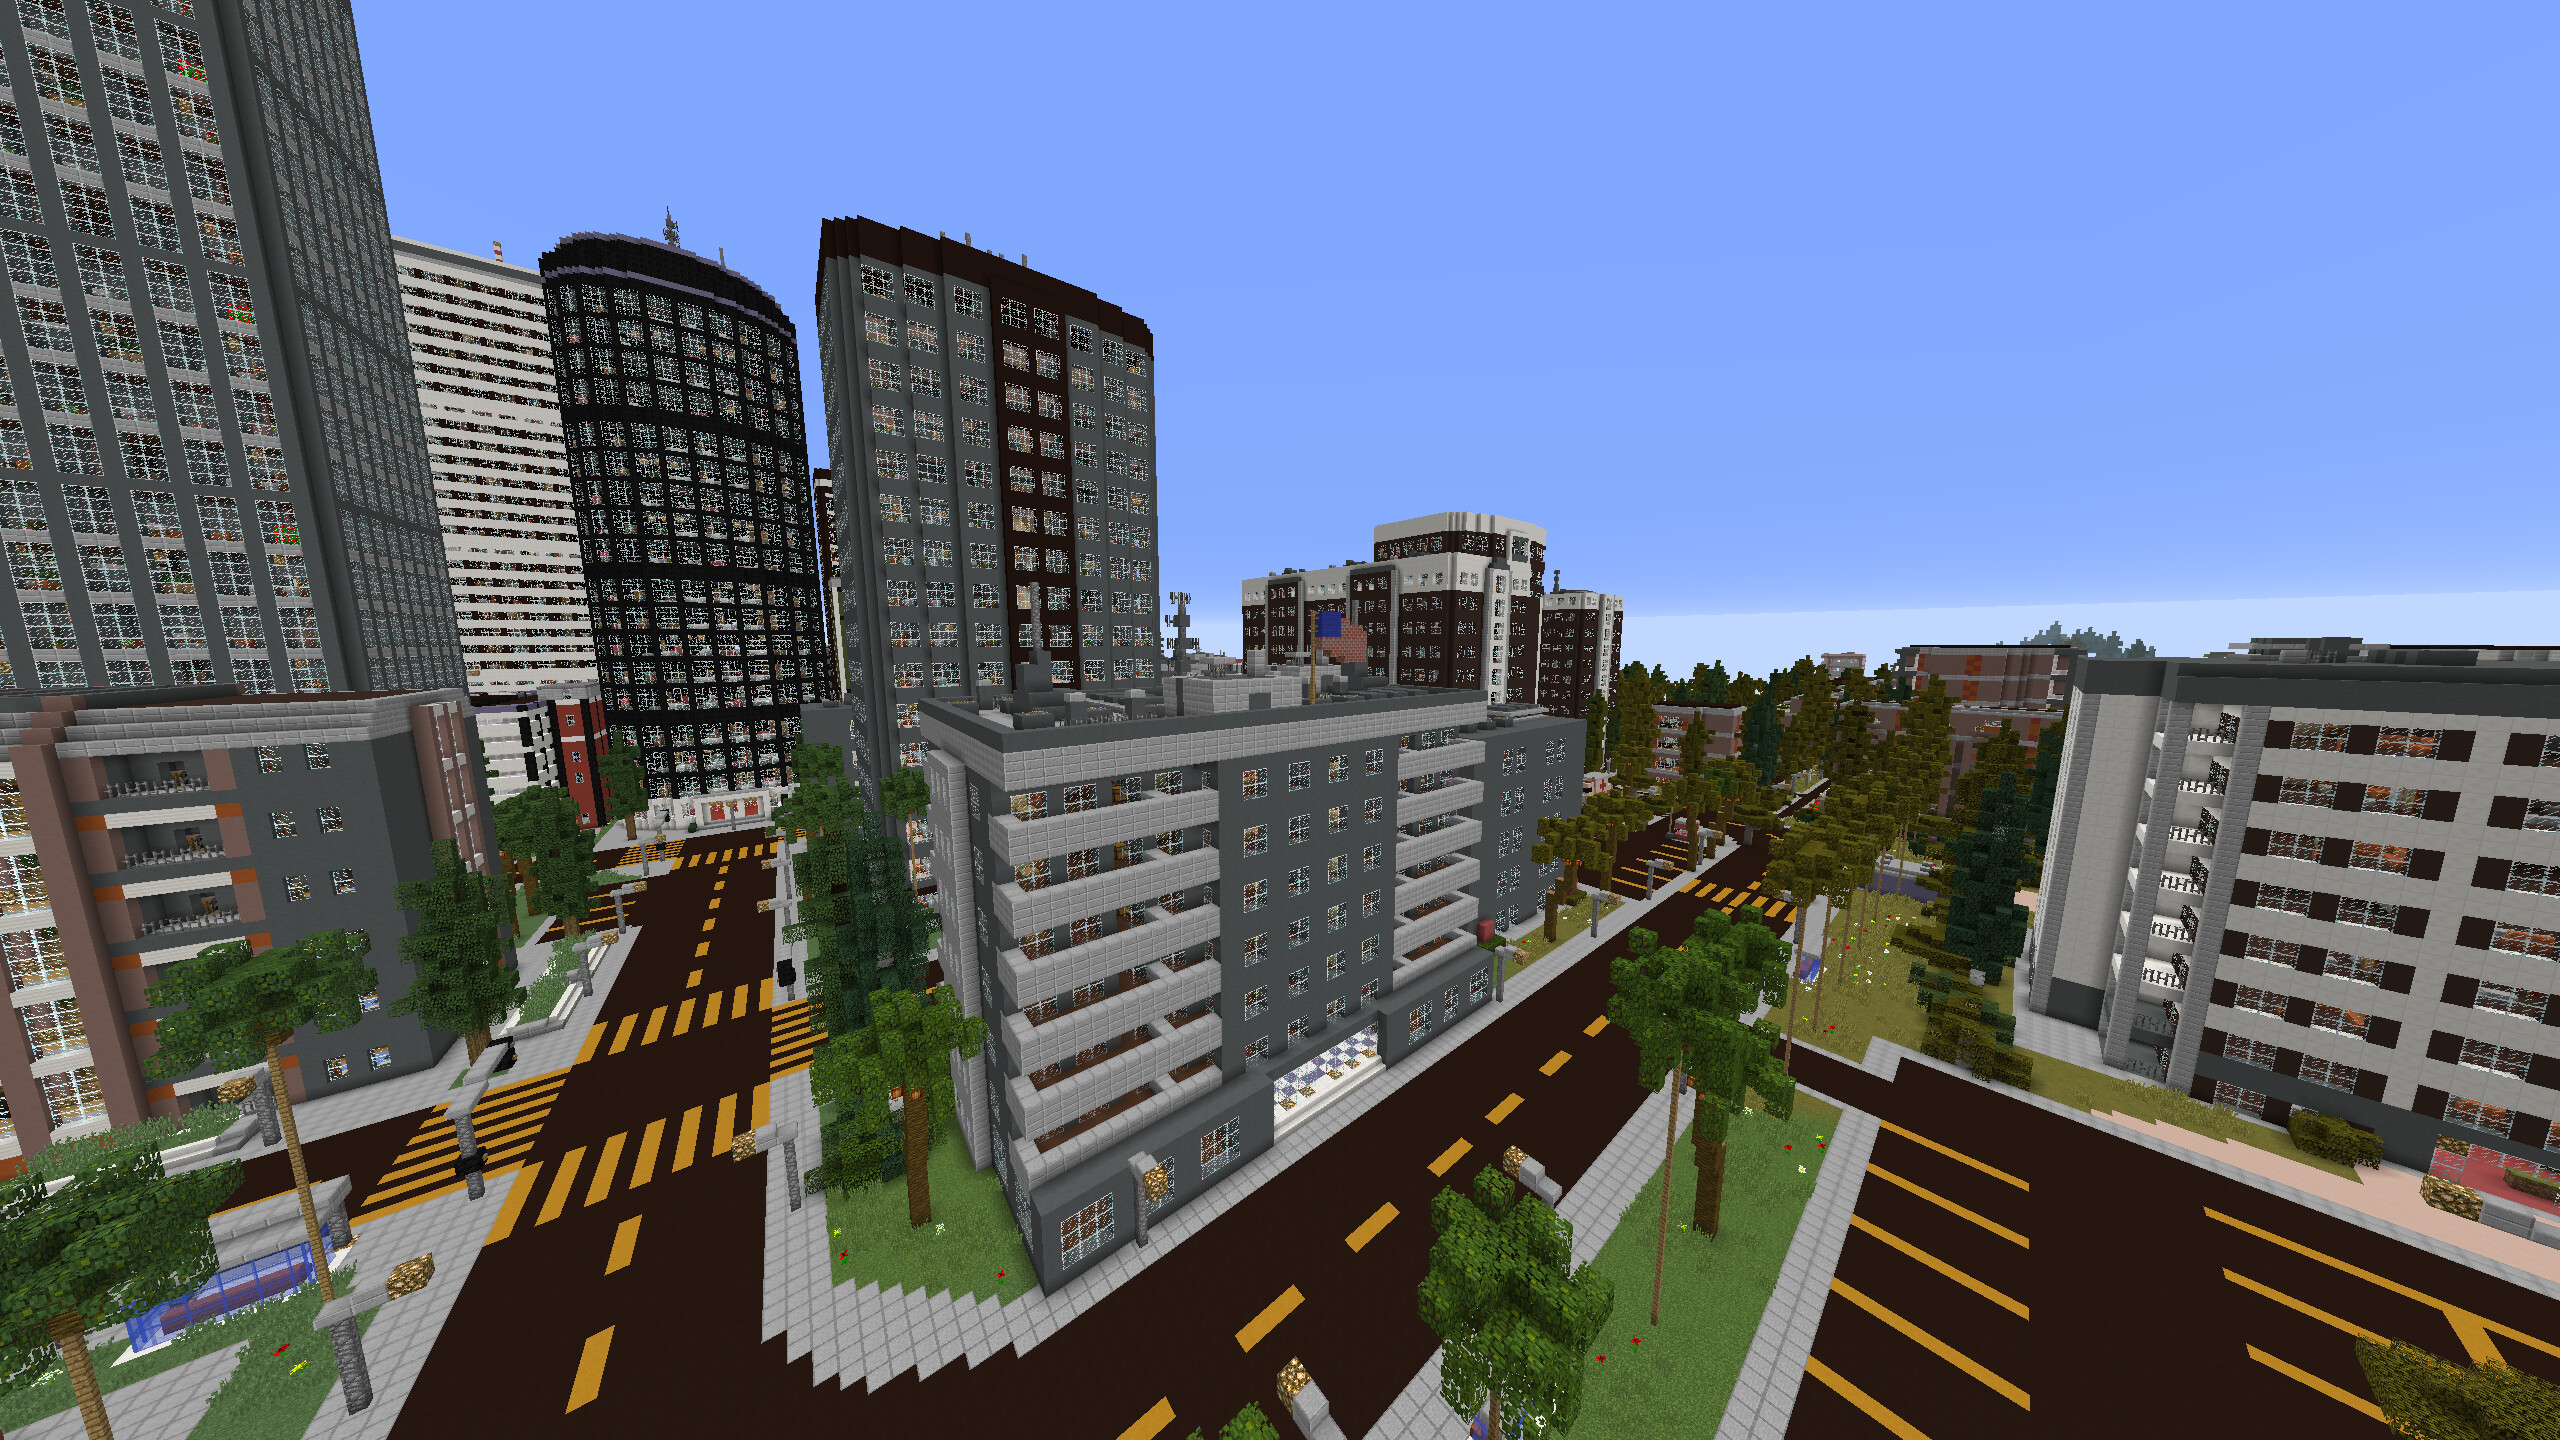 It’s Fun To Explore The Minecraft Version Of Los Angeles